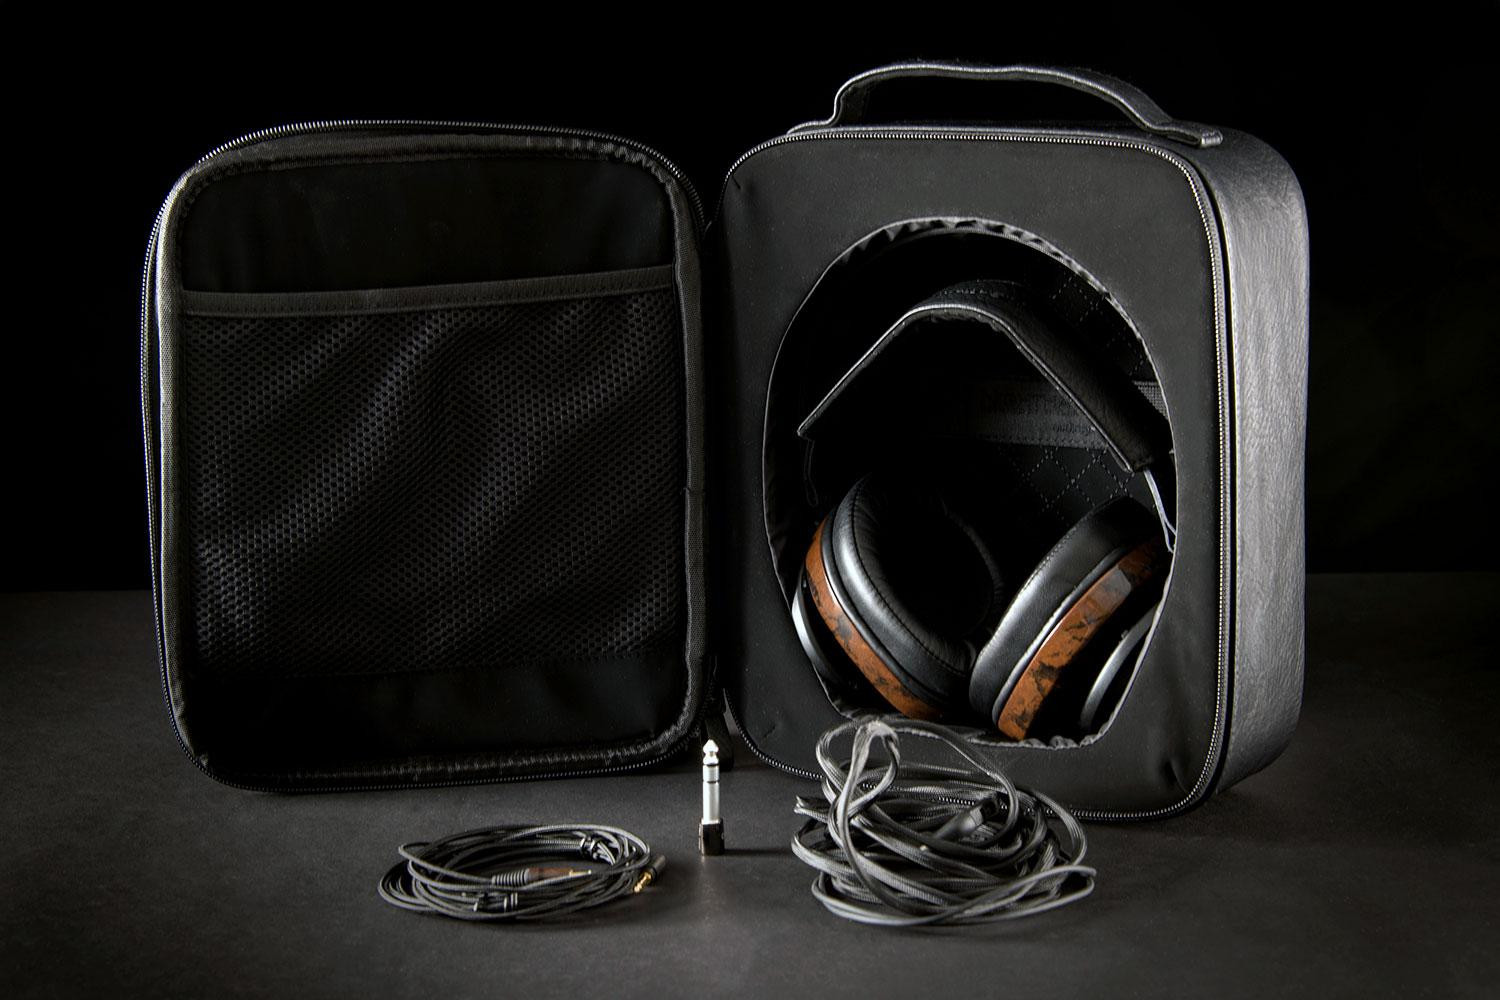 The AudioQuest Nighthawk case is the opposite of convenient.